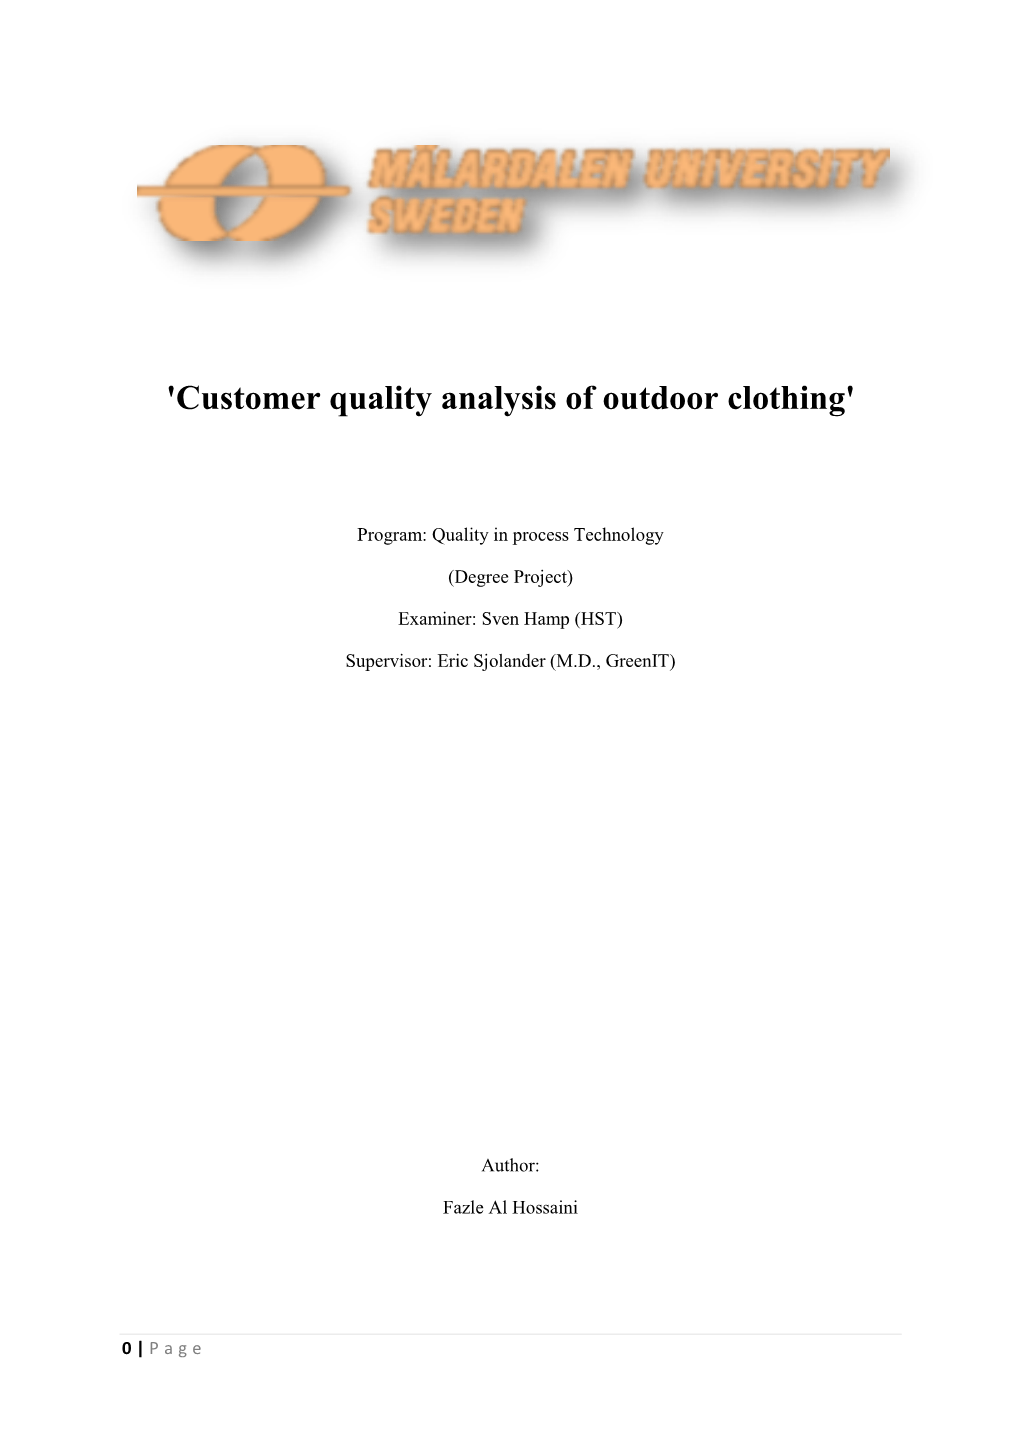 'Customer Quality Analysis of Outdoor Clothing'